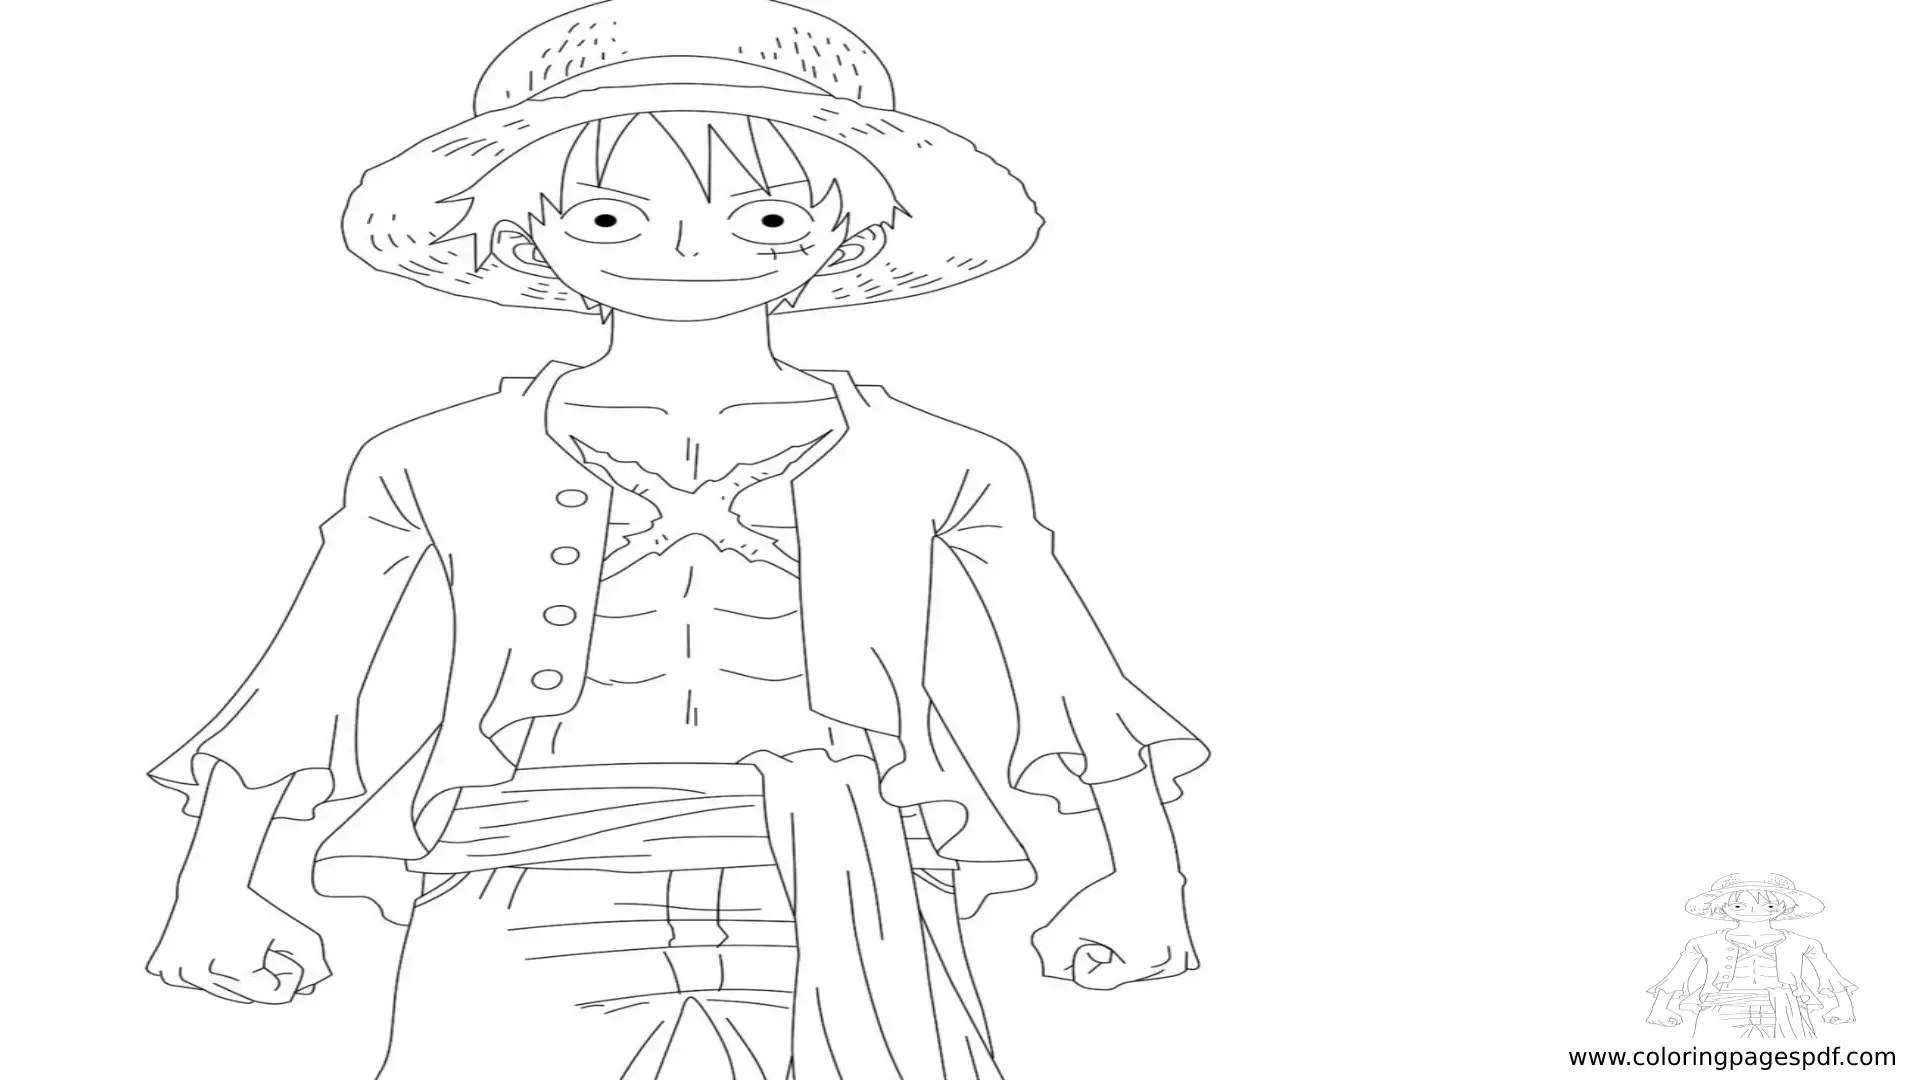 Coloring Page Of Monkey D. Luffy (One Piece)